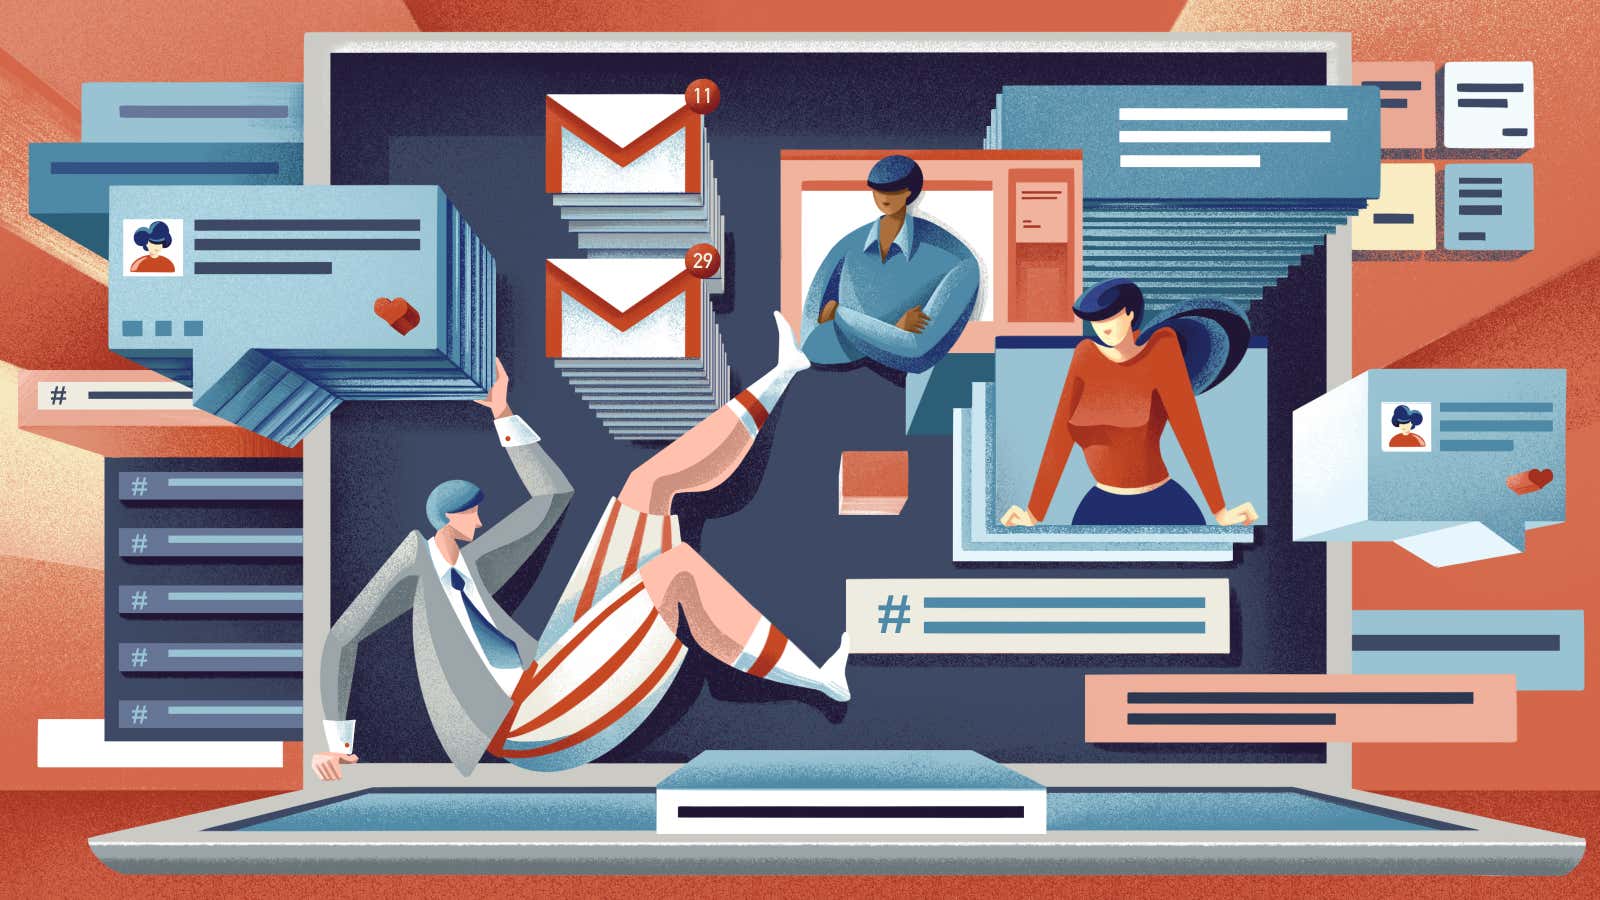 The workplace apps that could change the nature of work